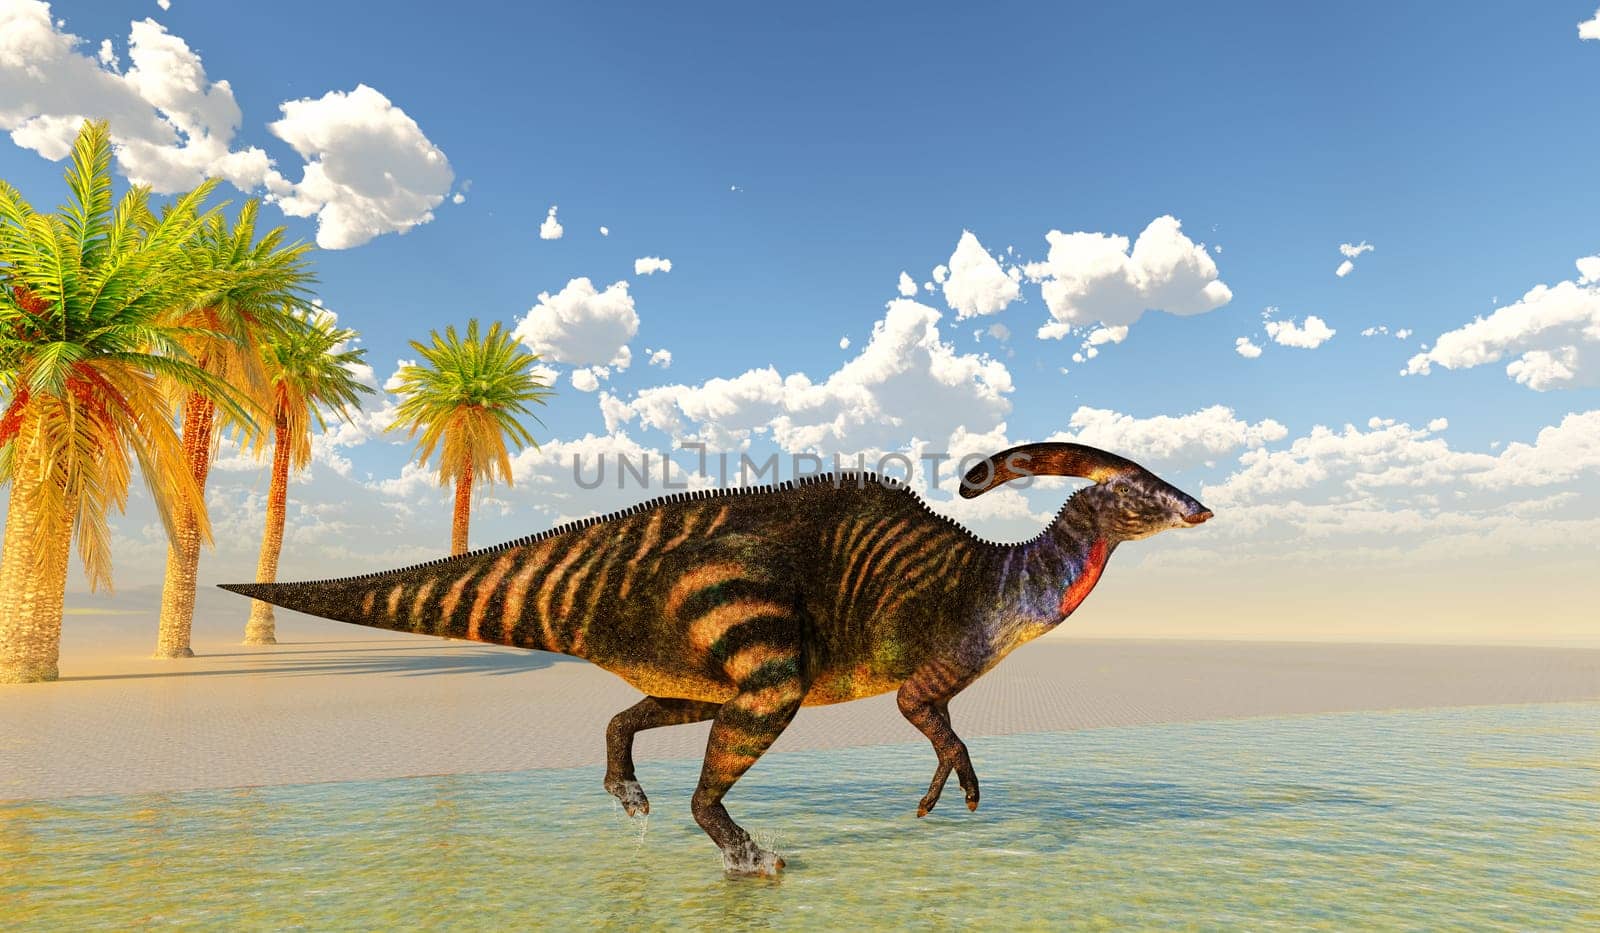 Parasaurolophus with a cranial crest was a herbivorous Hadrosaur dinosaur that lived in North America during the Cretaceous Period.